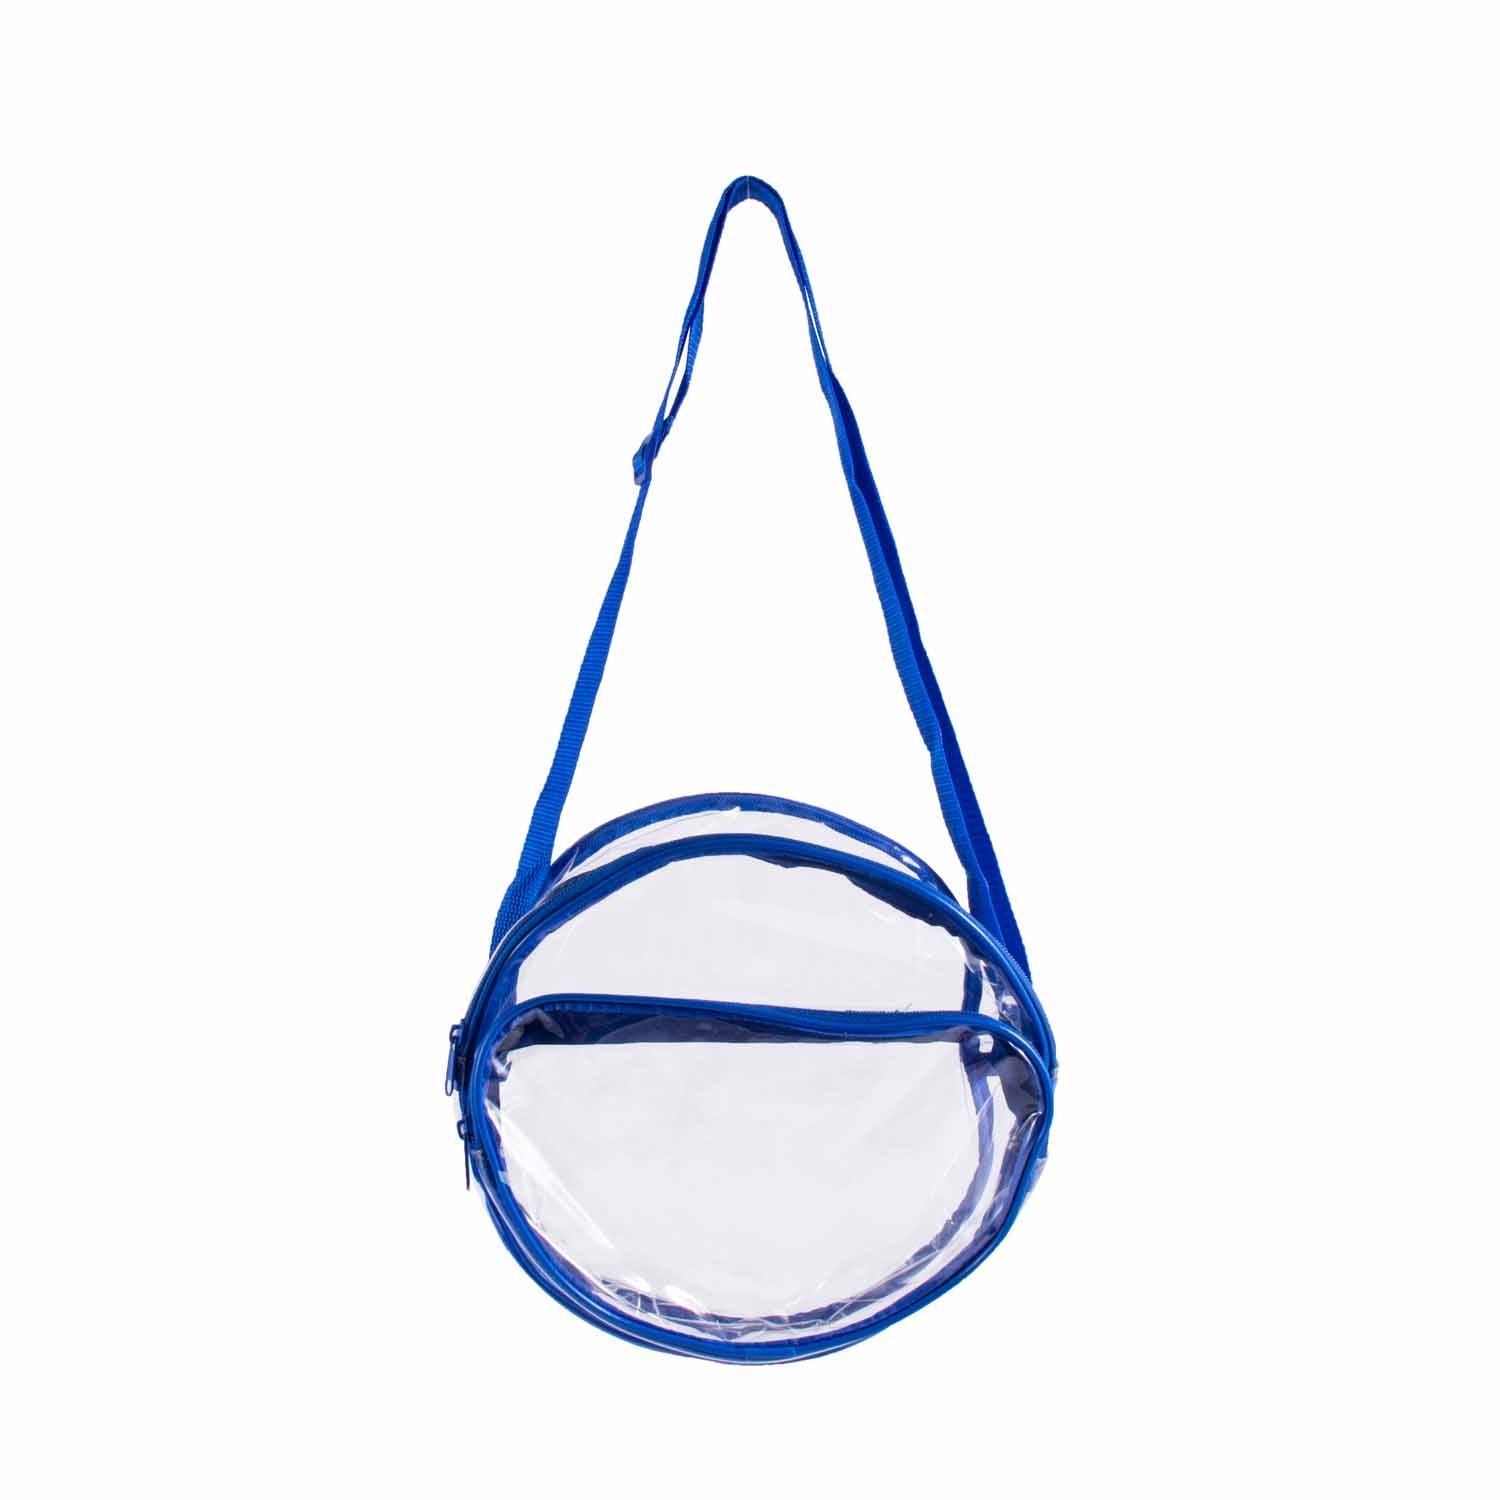 CLEARANCE WHOLESALE 10" CLEAR ROUND CROSSBODY (CASE OF 24 - $2.50 / PIECE) Wholesale Transparent Bag in Assorted Colors SKU: 10-ROUND-24